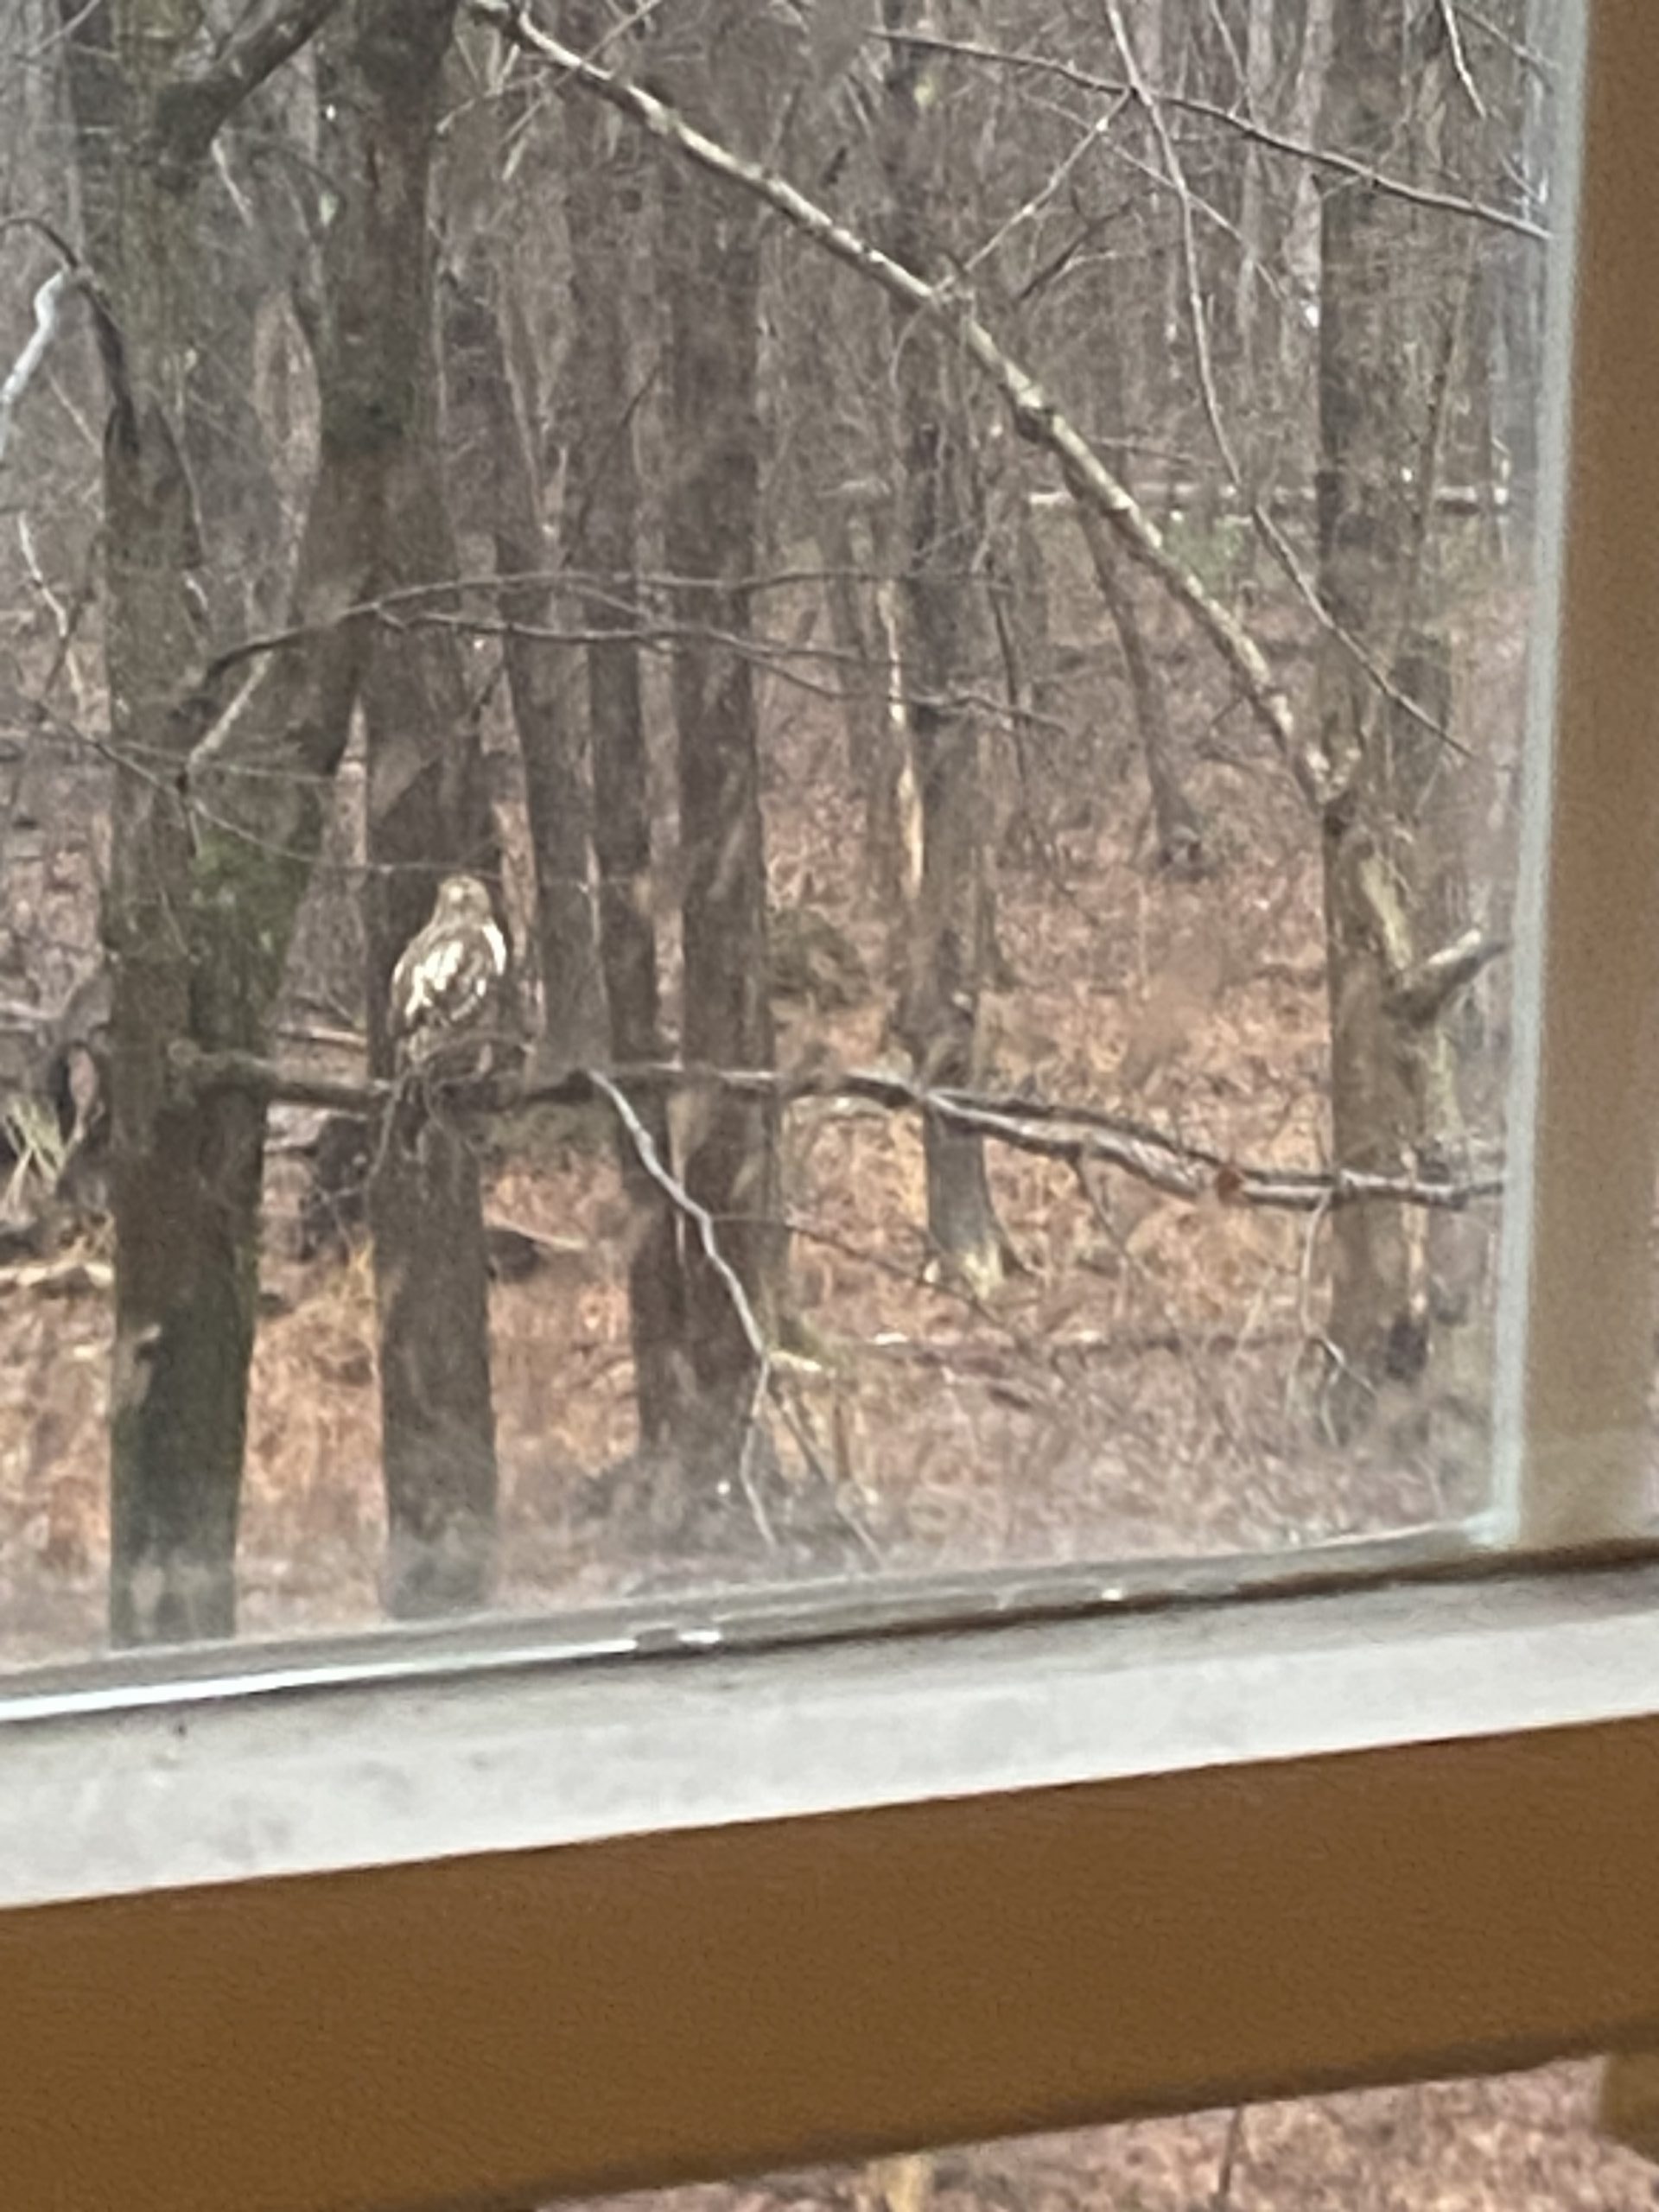 Dec 23 another visit from a hawk …